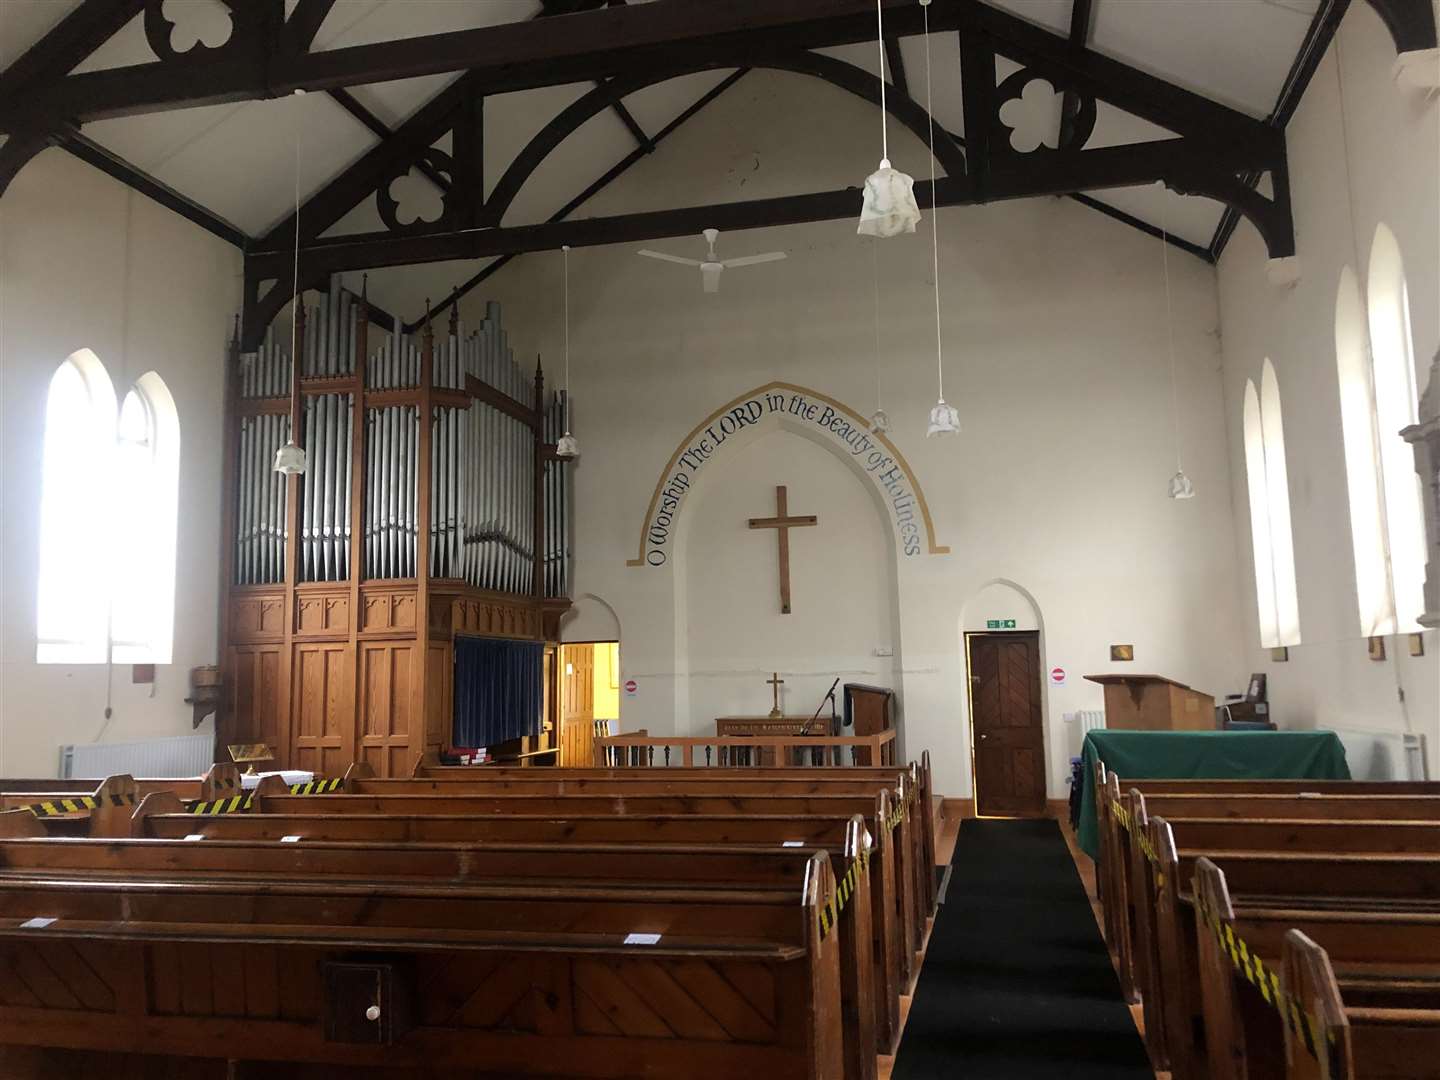 The interior of the church - the organ has since been removed